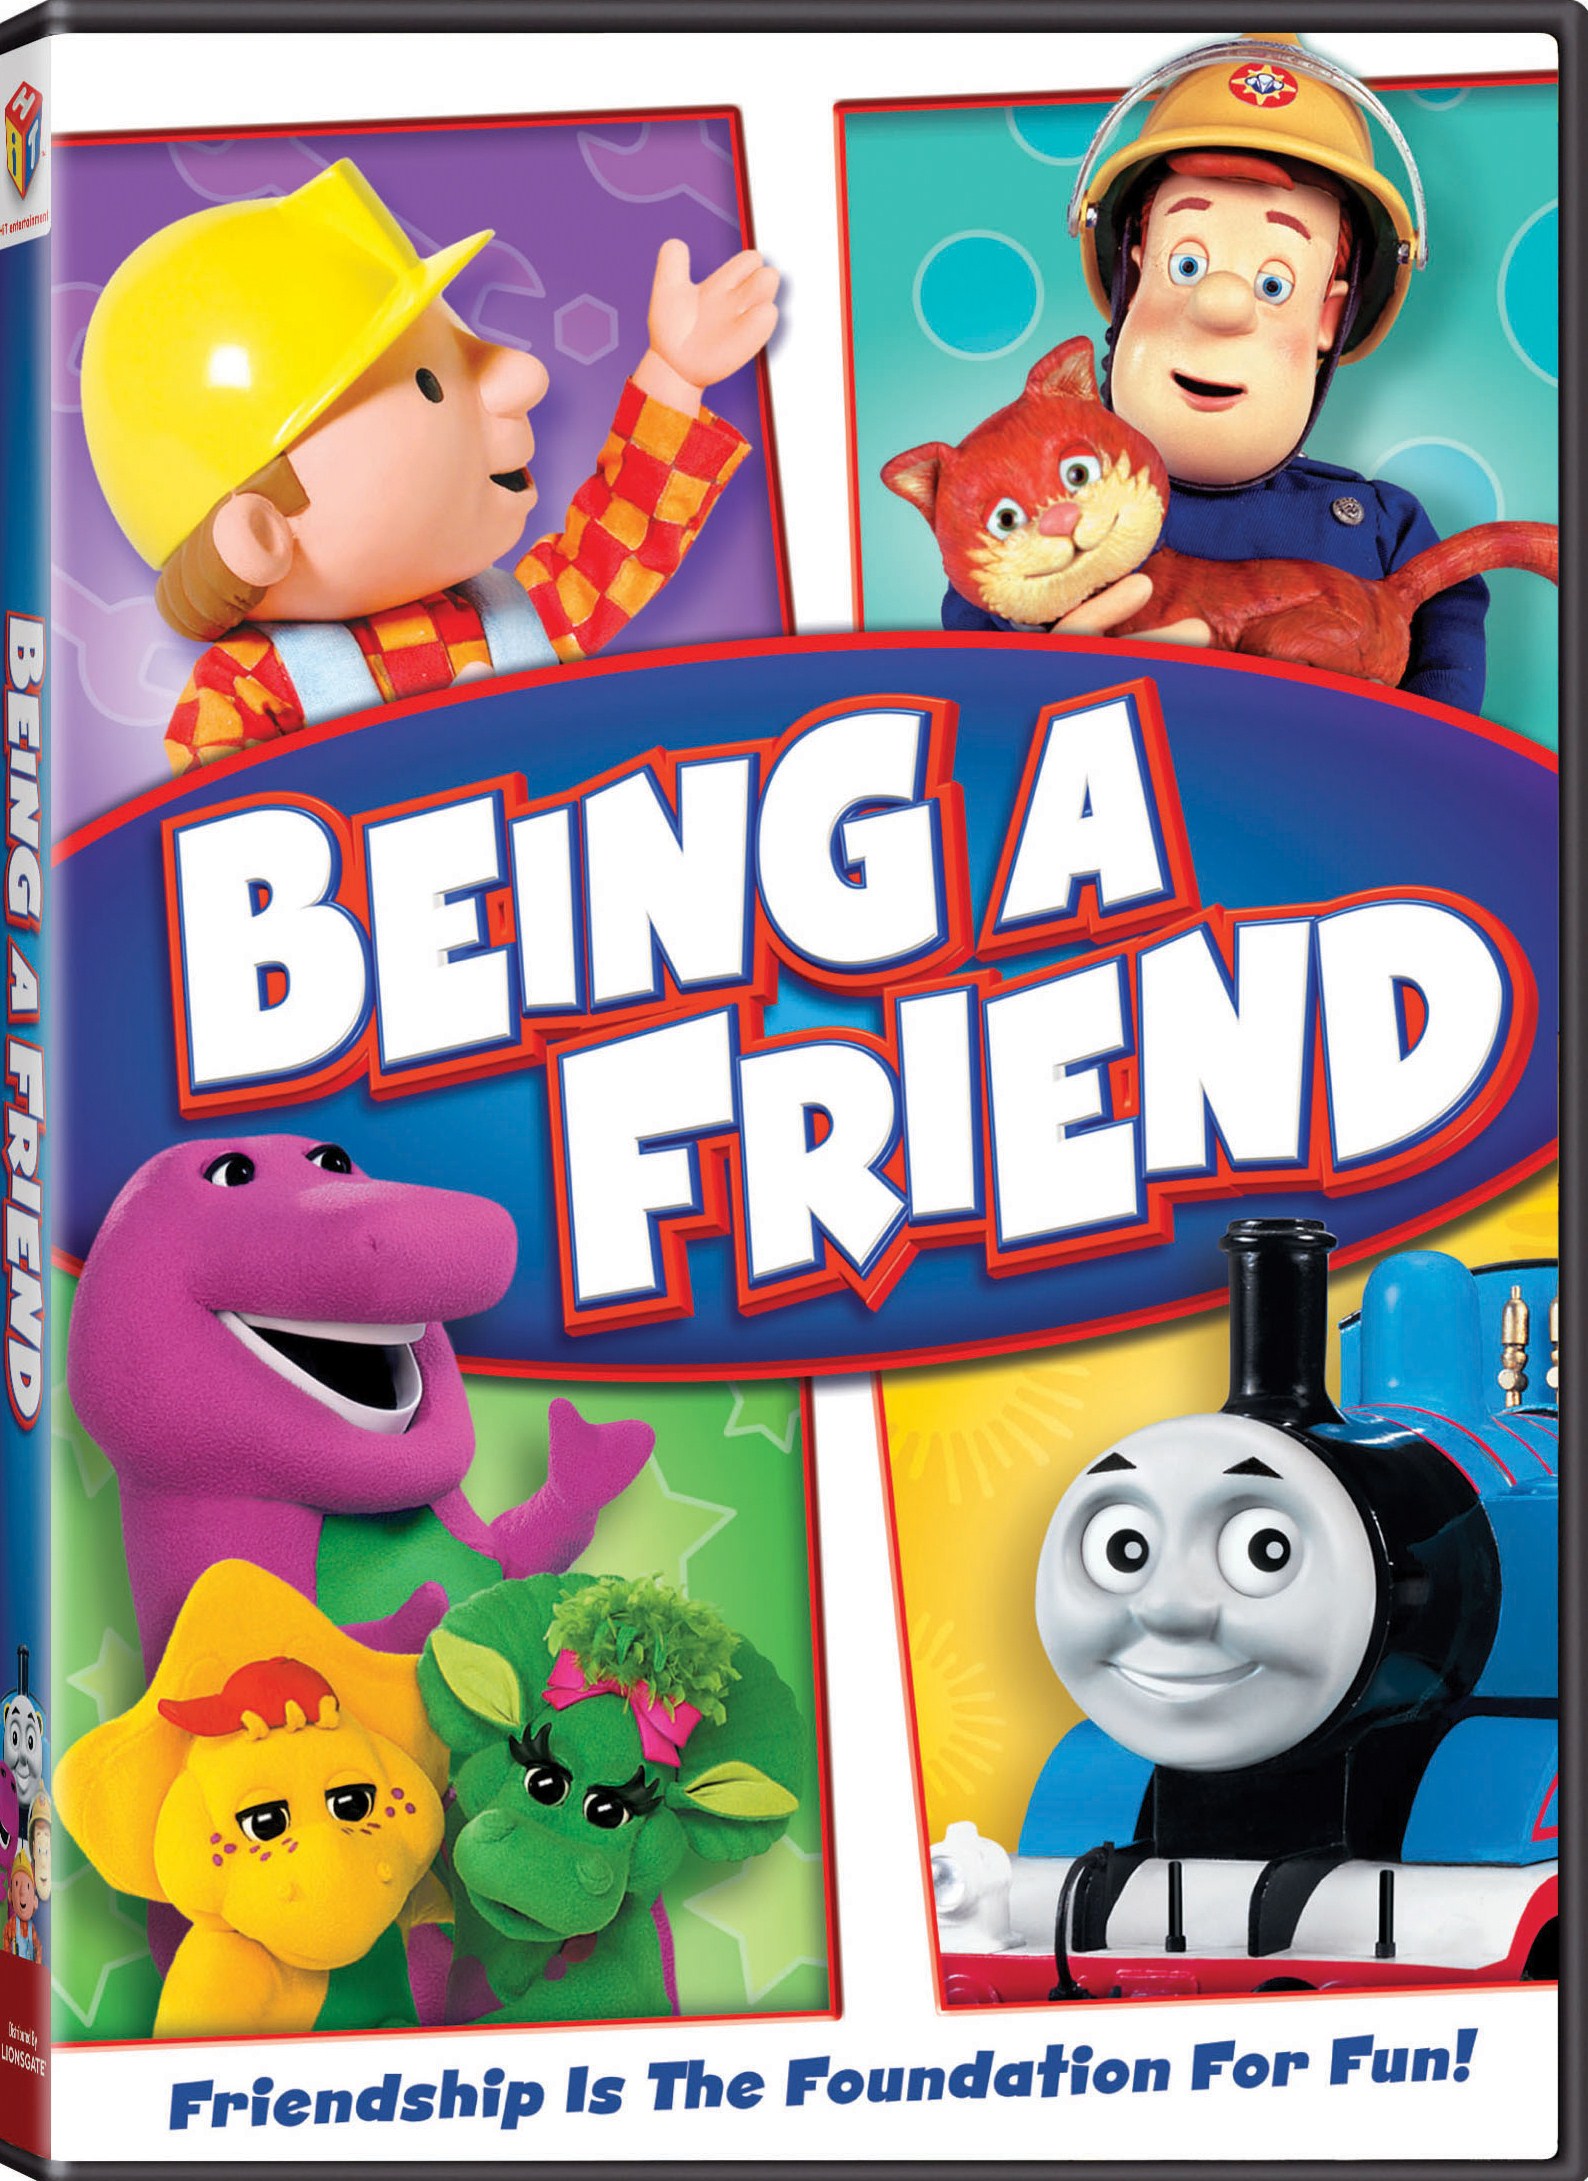 HiT Favorites: Being a Friend | US Home Video Collection Wiki | Fandom